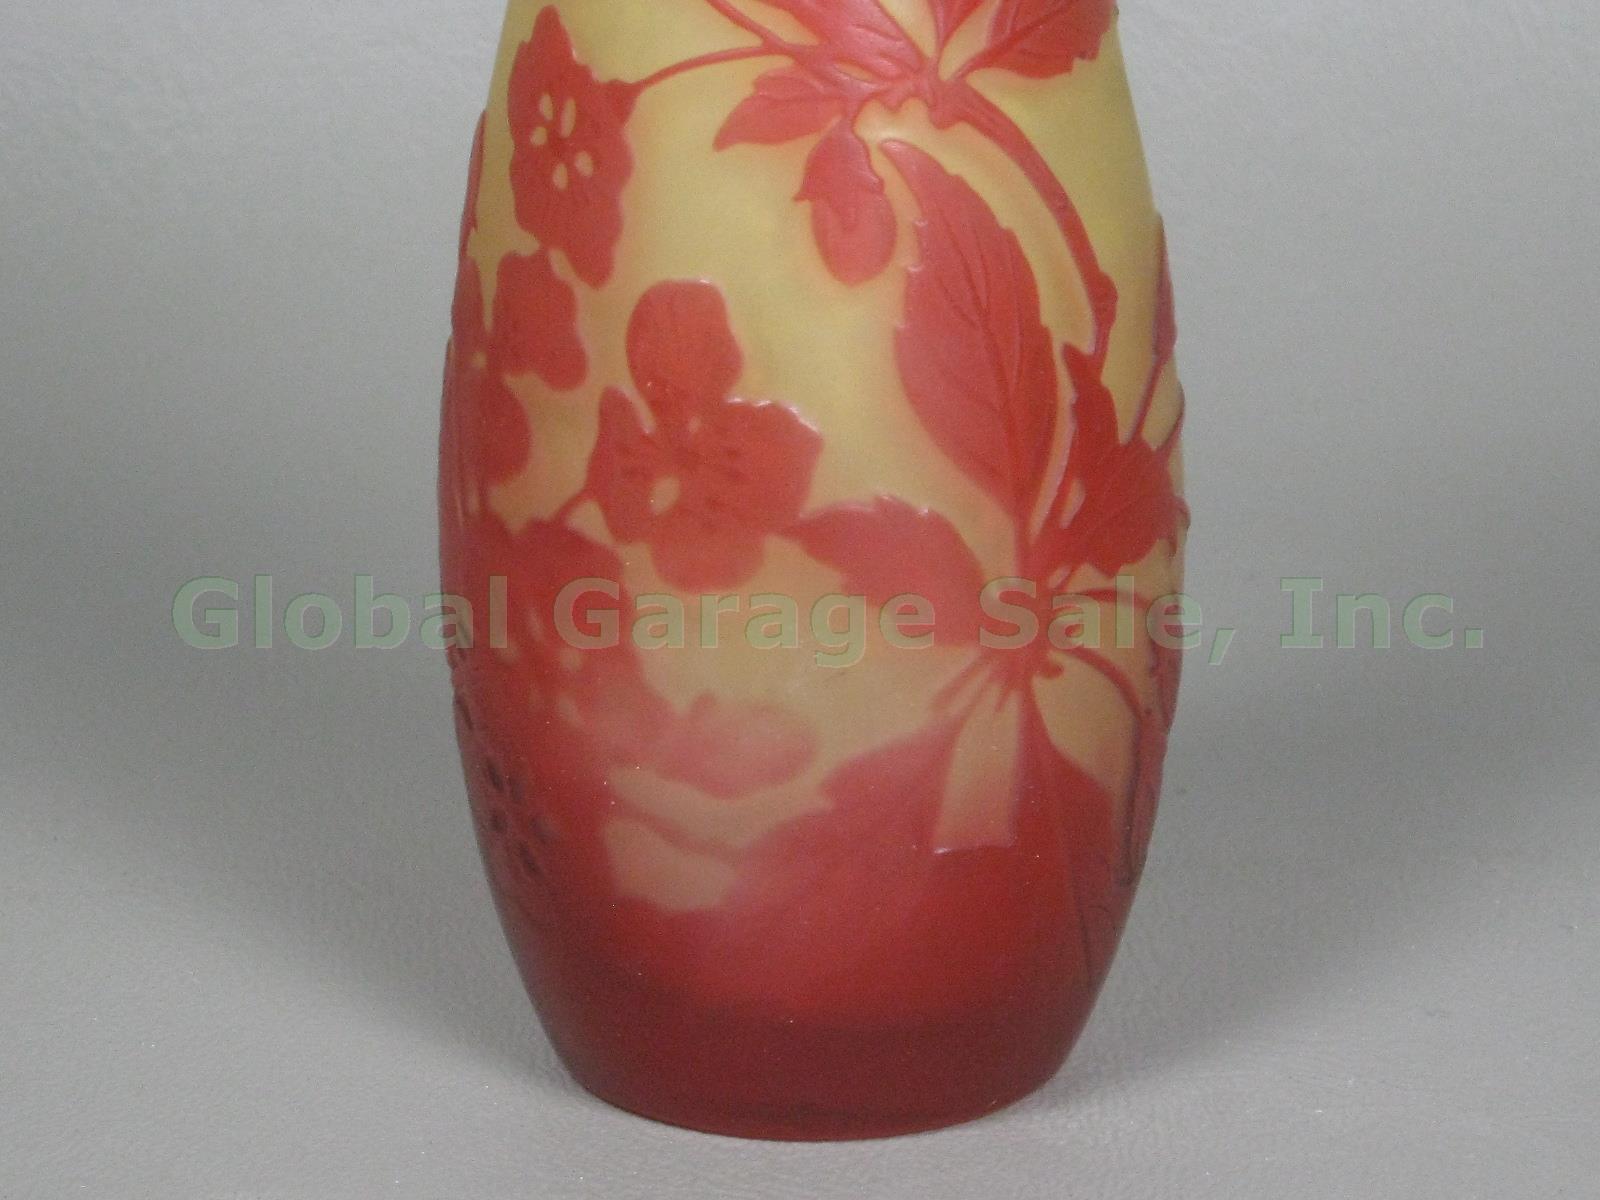 Antique Emile Galle Signed Cameo Art Glass Perfume Bottle Bud Vase Red & Yellow 2